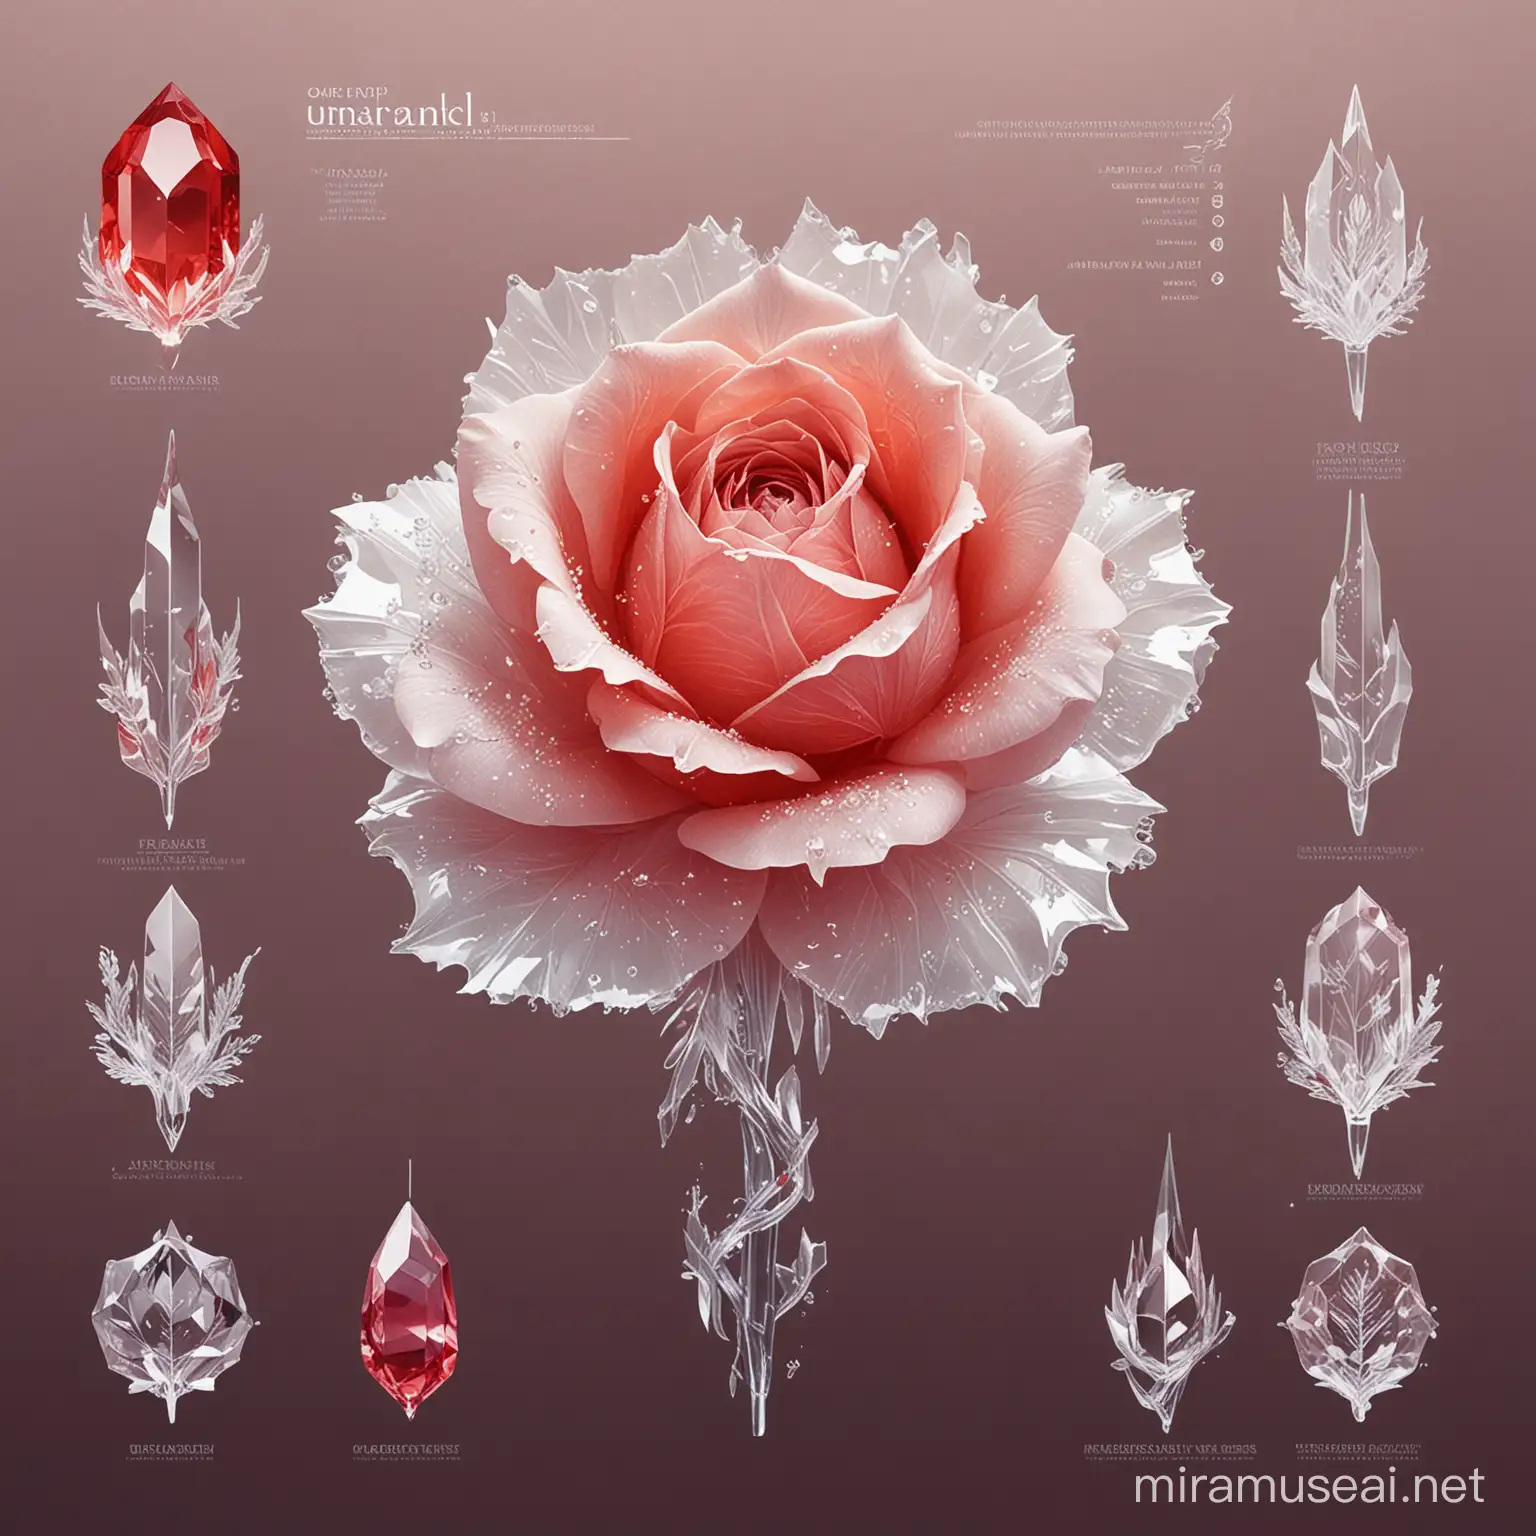 infographic of one morph ice rose, specimens of white clear crystal petals, very delicate and beautiful, ethereal specimen, FINAL FANTASY 10, red gemstone decoration, lithograph, good design sense, highly detailed, in the style of futuristic organic and watercolor illustration, minimalism